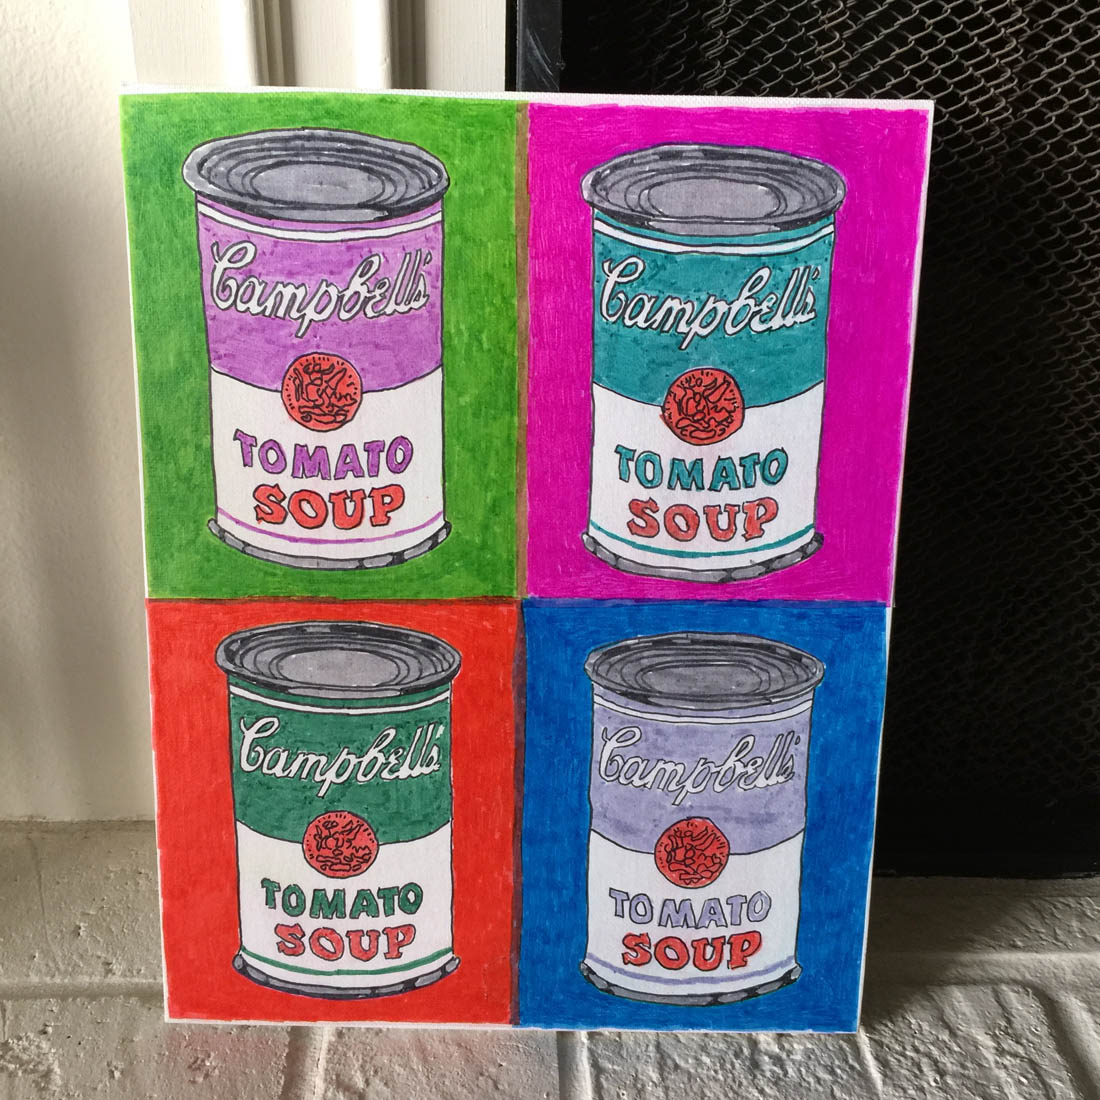 Campbellamp 039s Condensed Tomato Soup Andy Warhol Pics